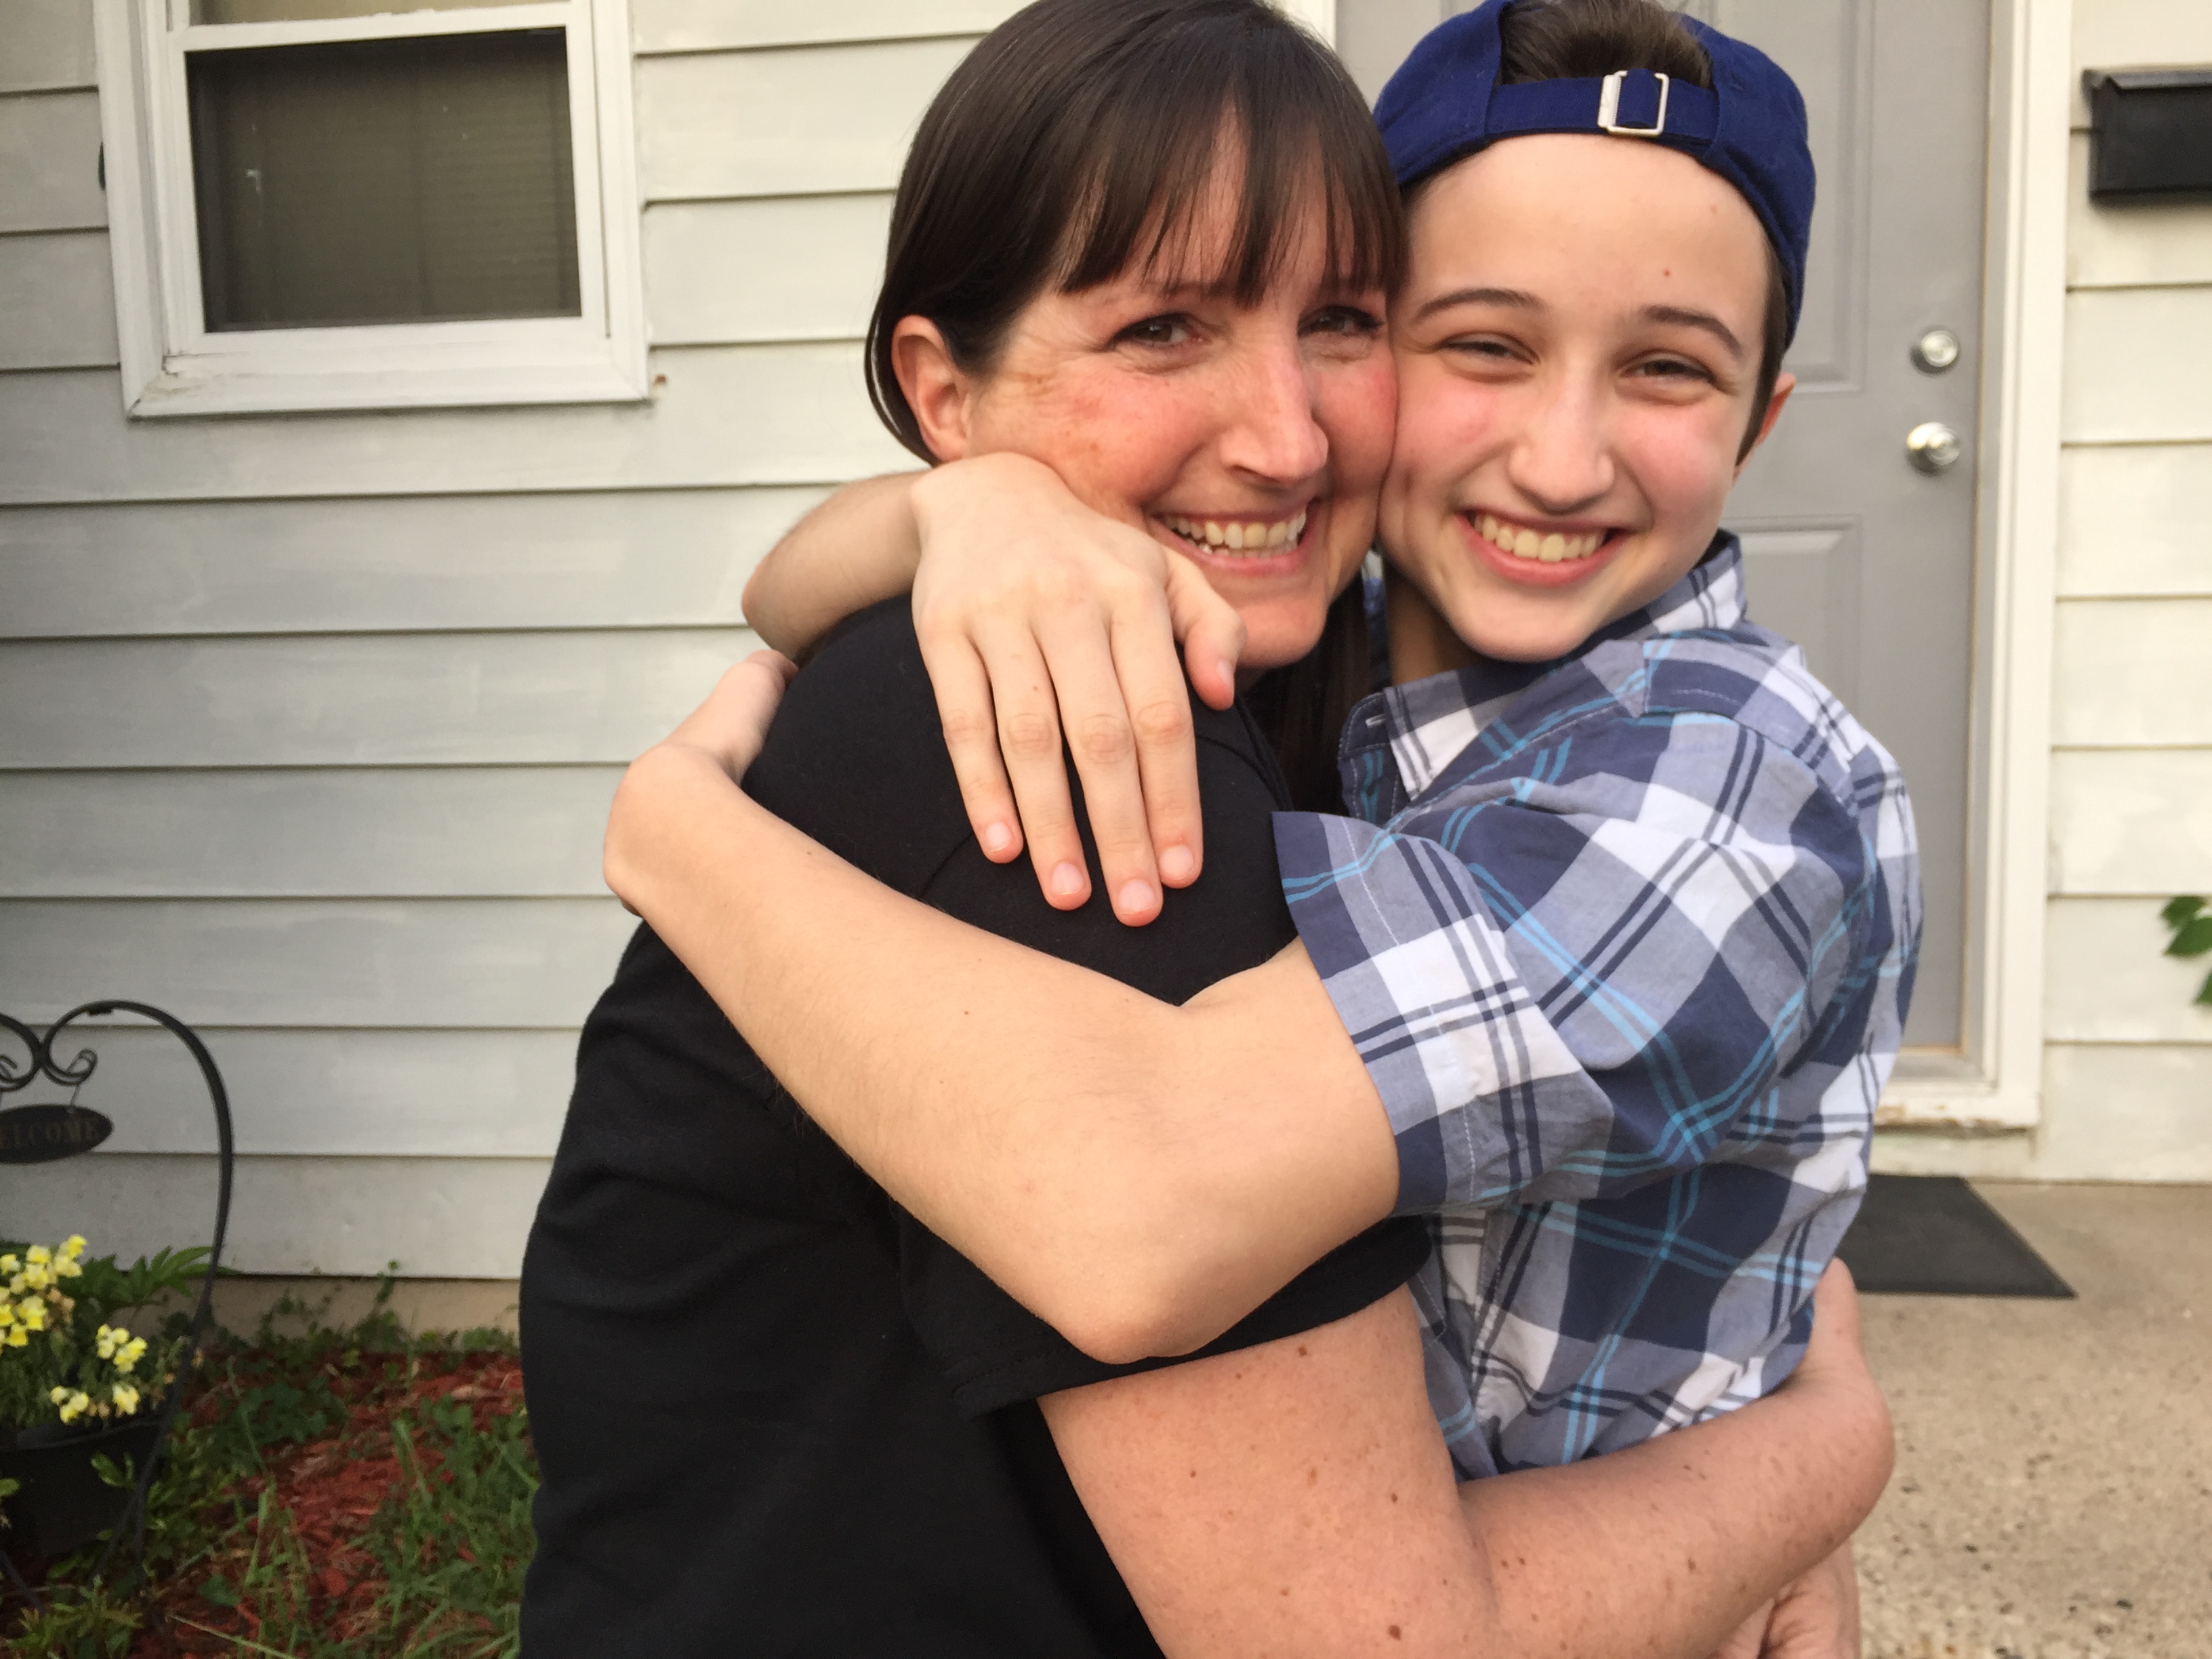 Victory! Court orders WI school to immediately halt discriminatory policy against transgender student